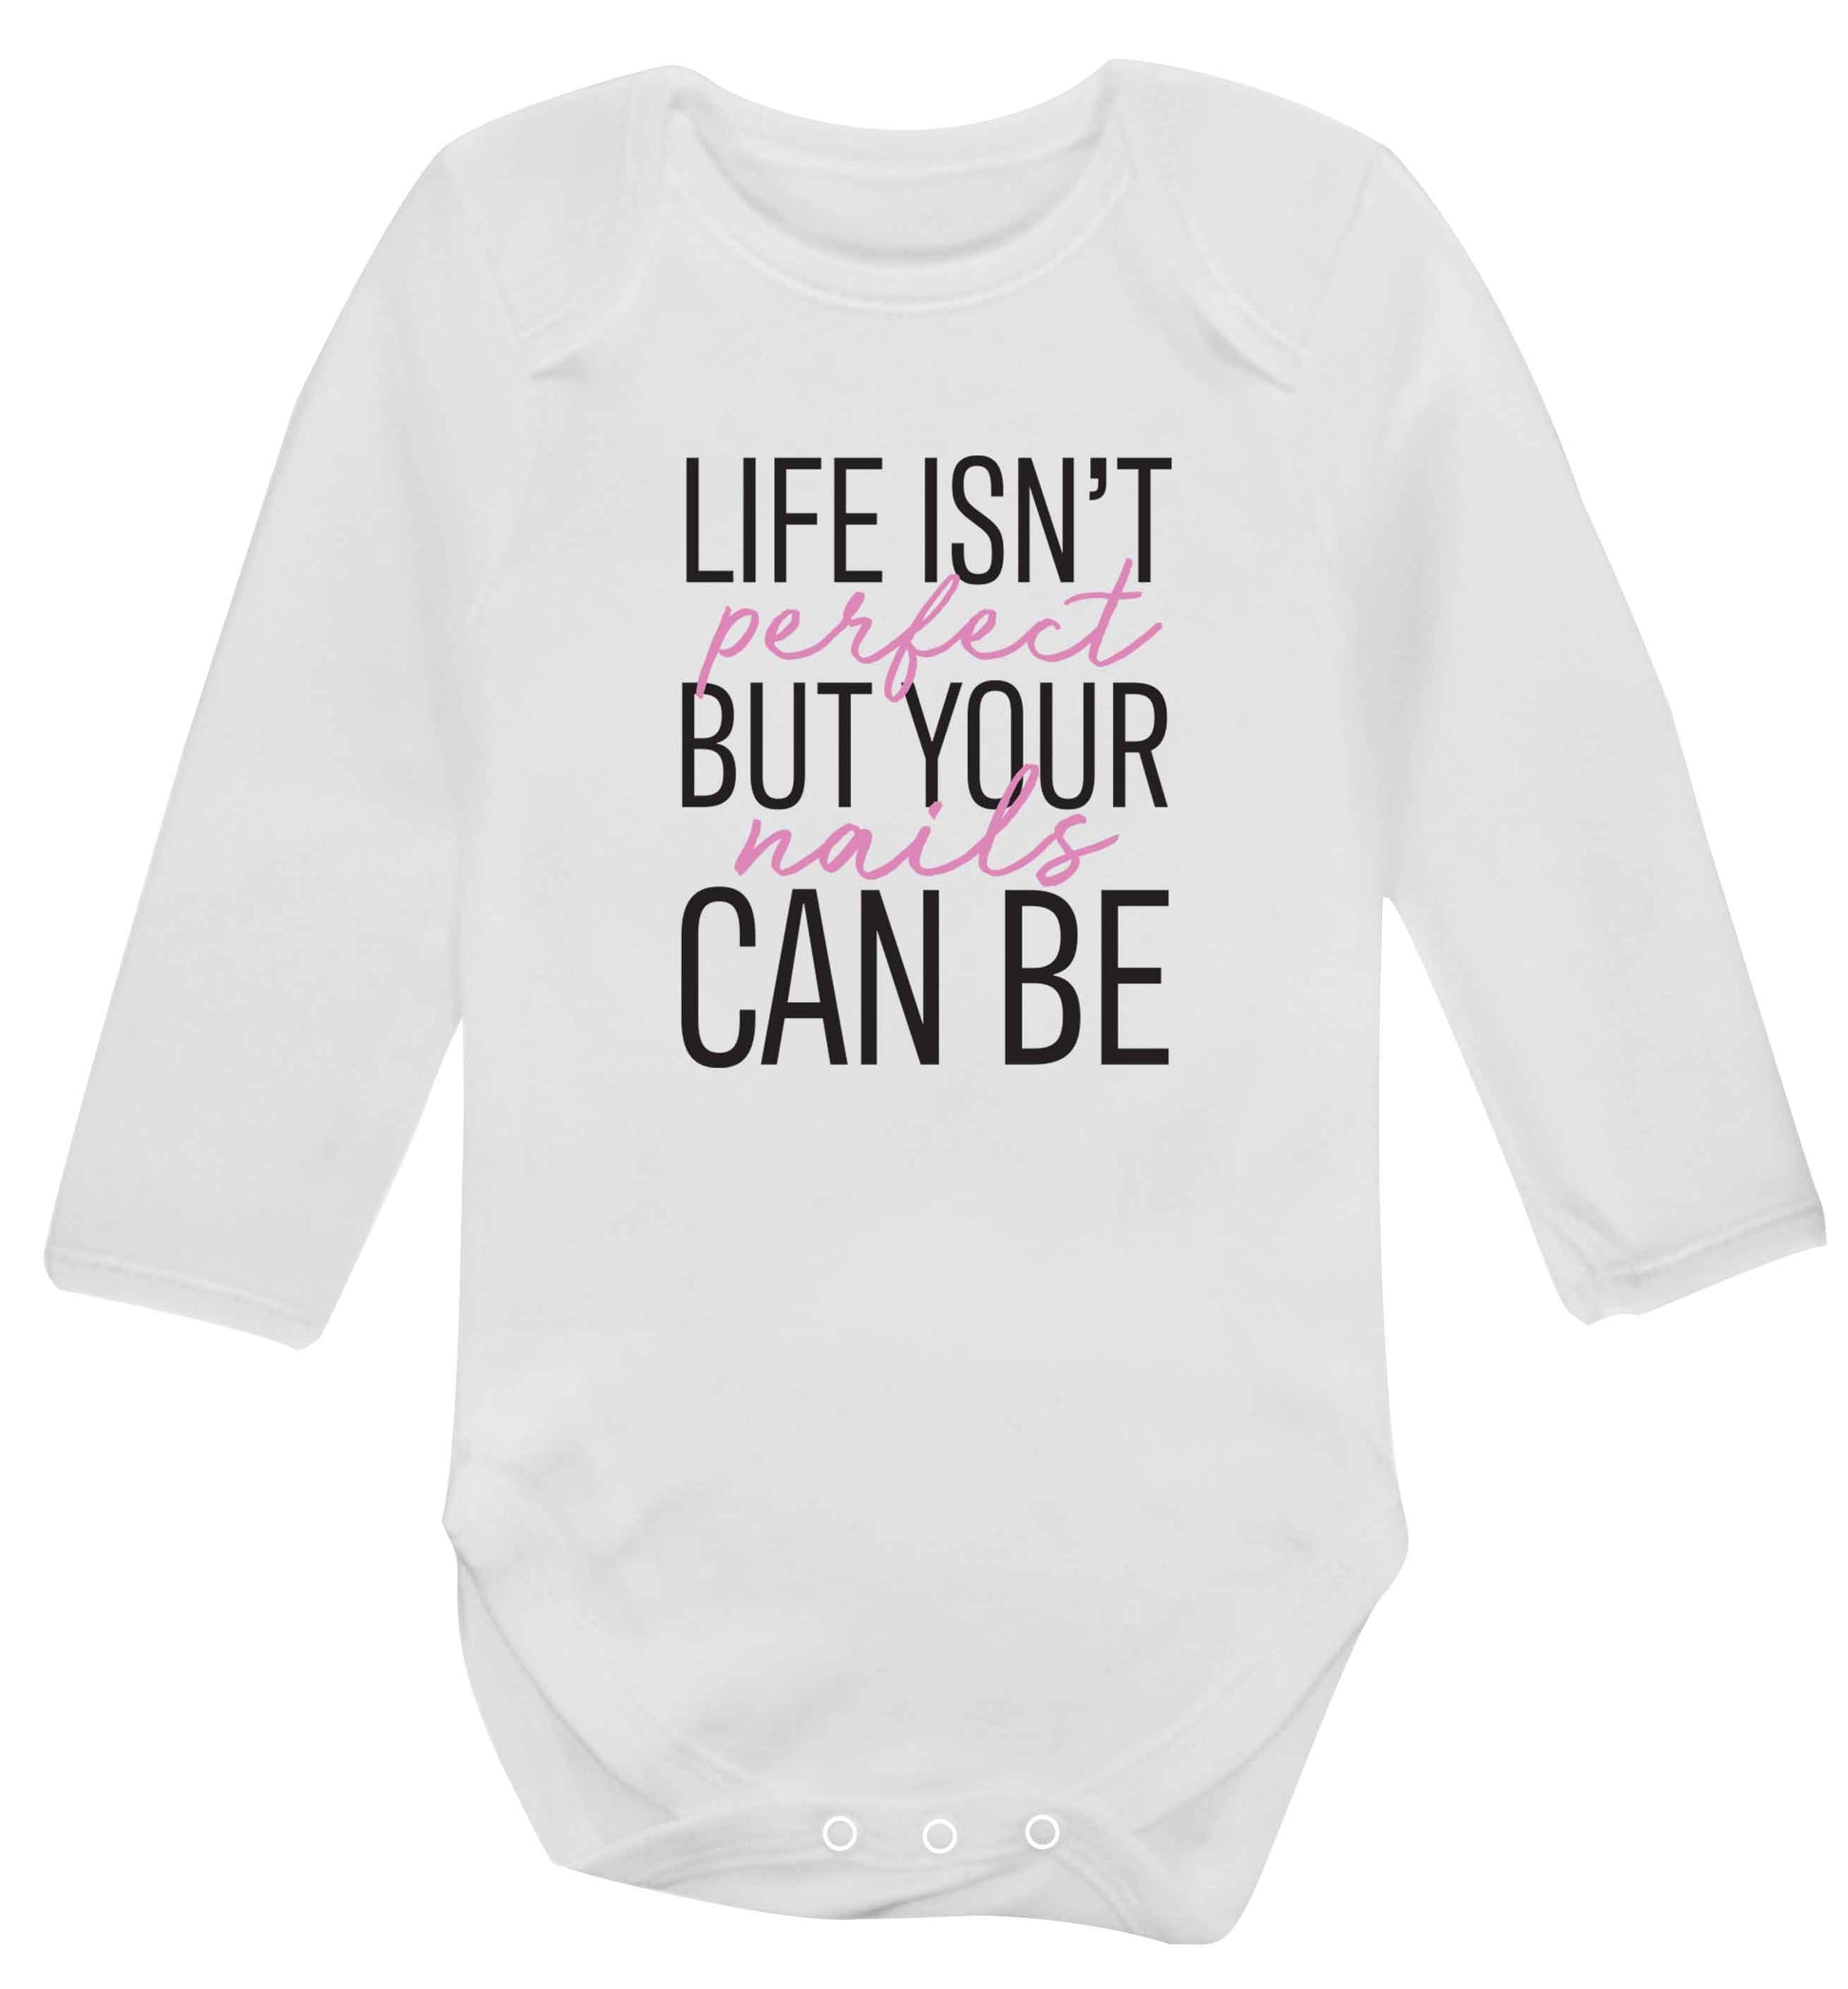 Life isn't perfect but your nails can be baby vest long sleeved white 6-12 months